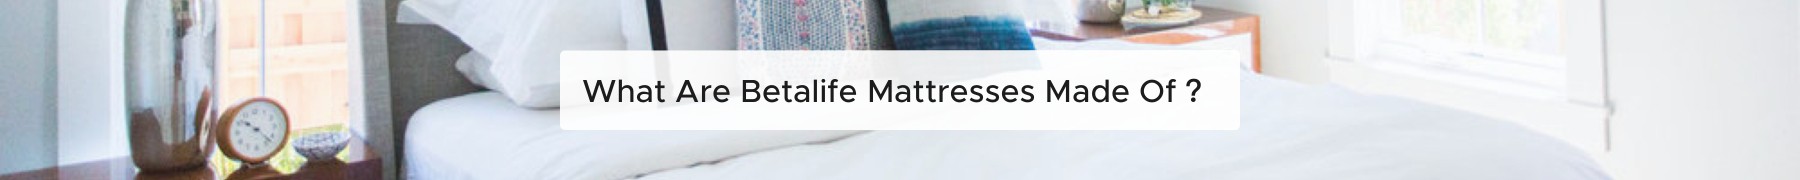 What Are Betalife Mattresses Made Of